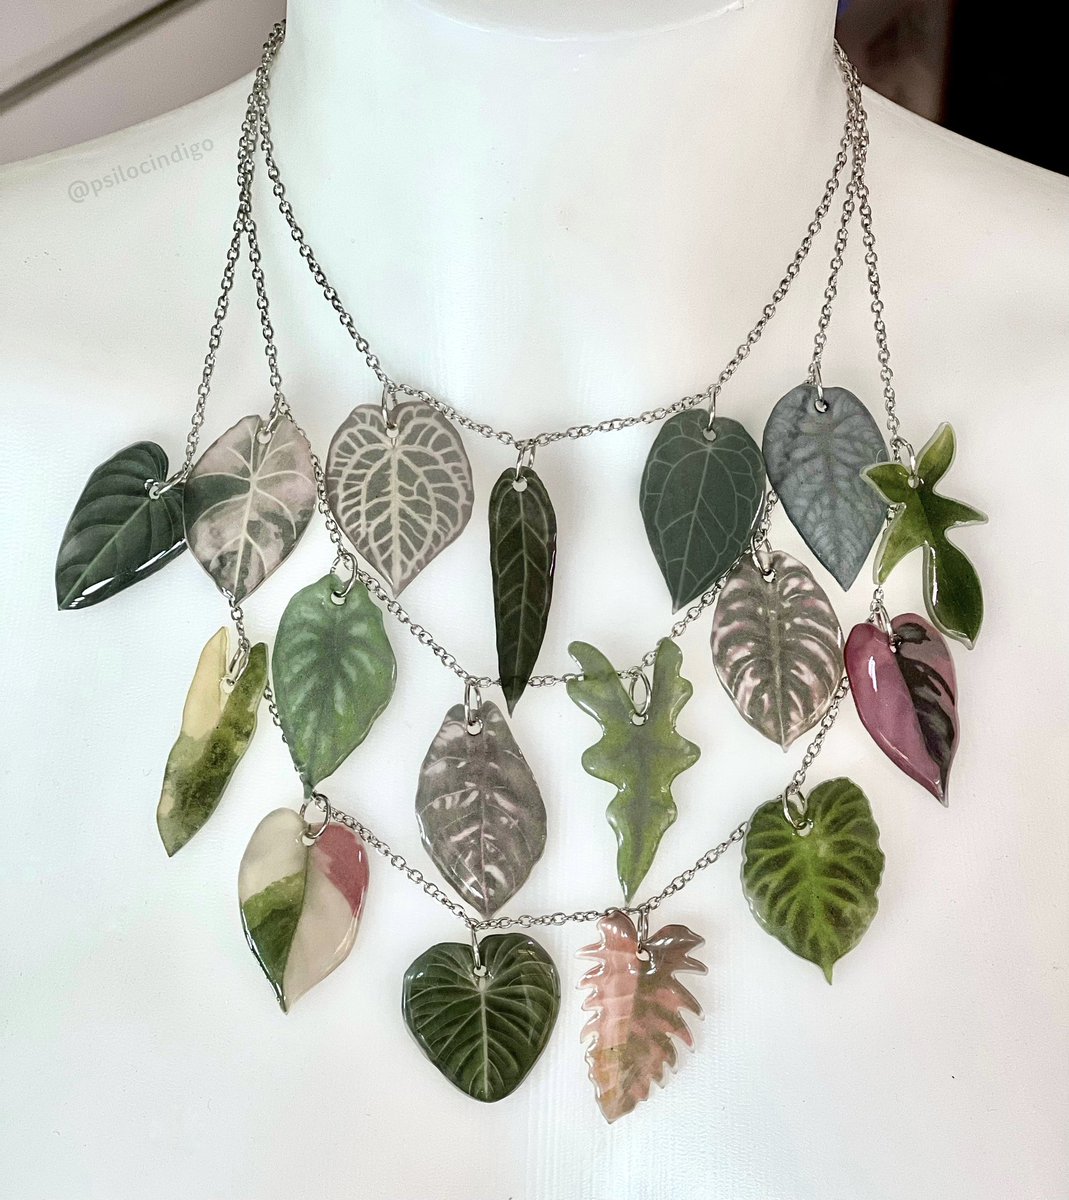 accidentally let thousands of dollars worth of my plants perish during a depressive episode, so i’m coping by painting each one & turning them into jewelry lol